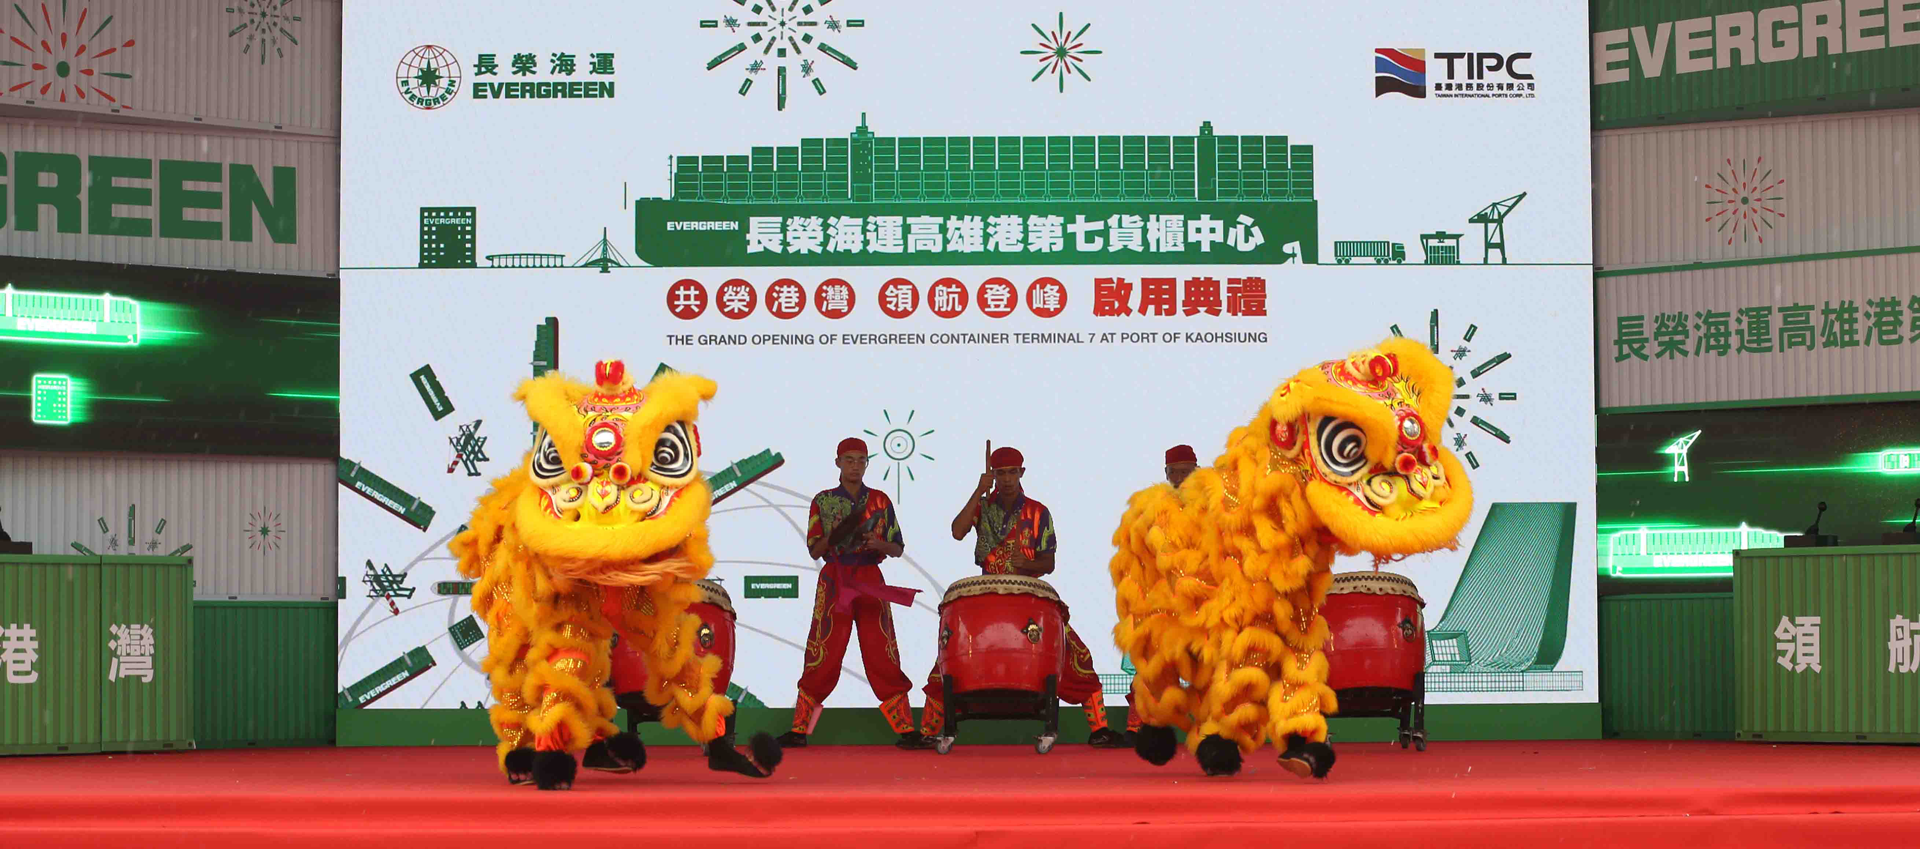 Taiwan celebrates first automated container terminal with Evergreen, MTB Events. Image shows traditional lion dance at the opening ceremony